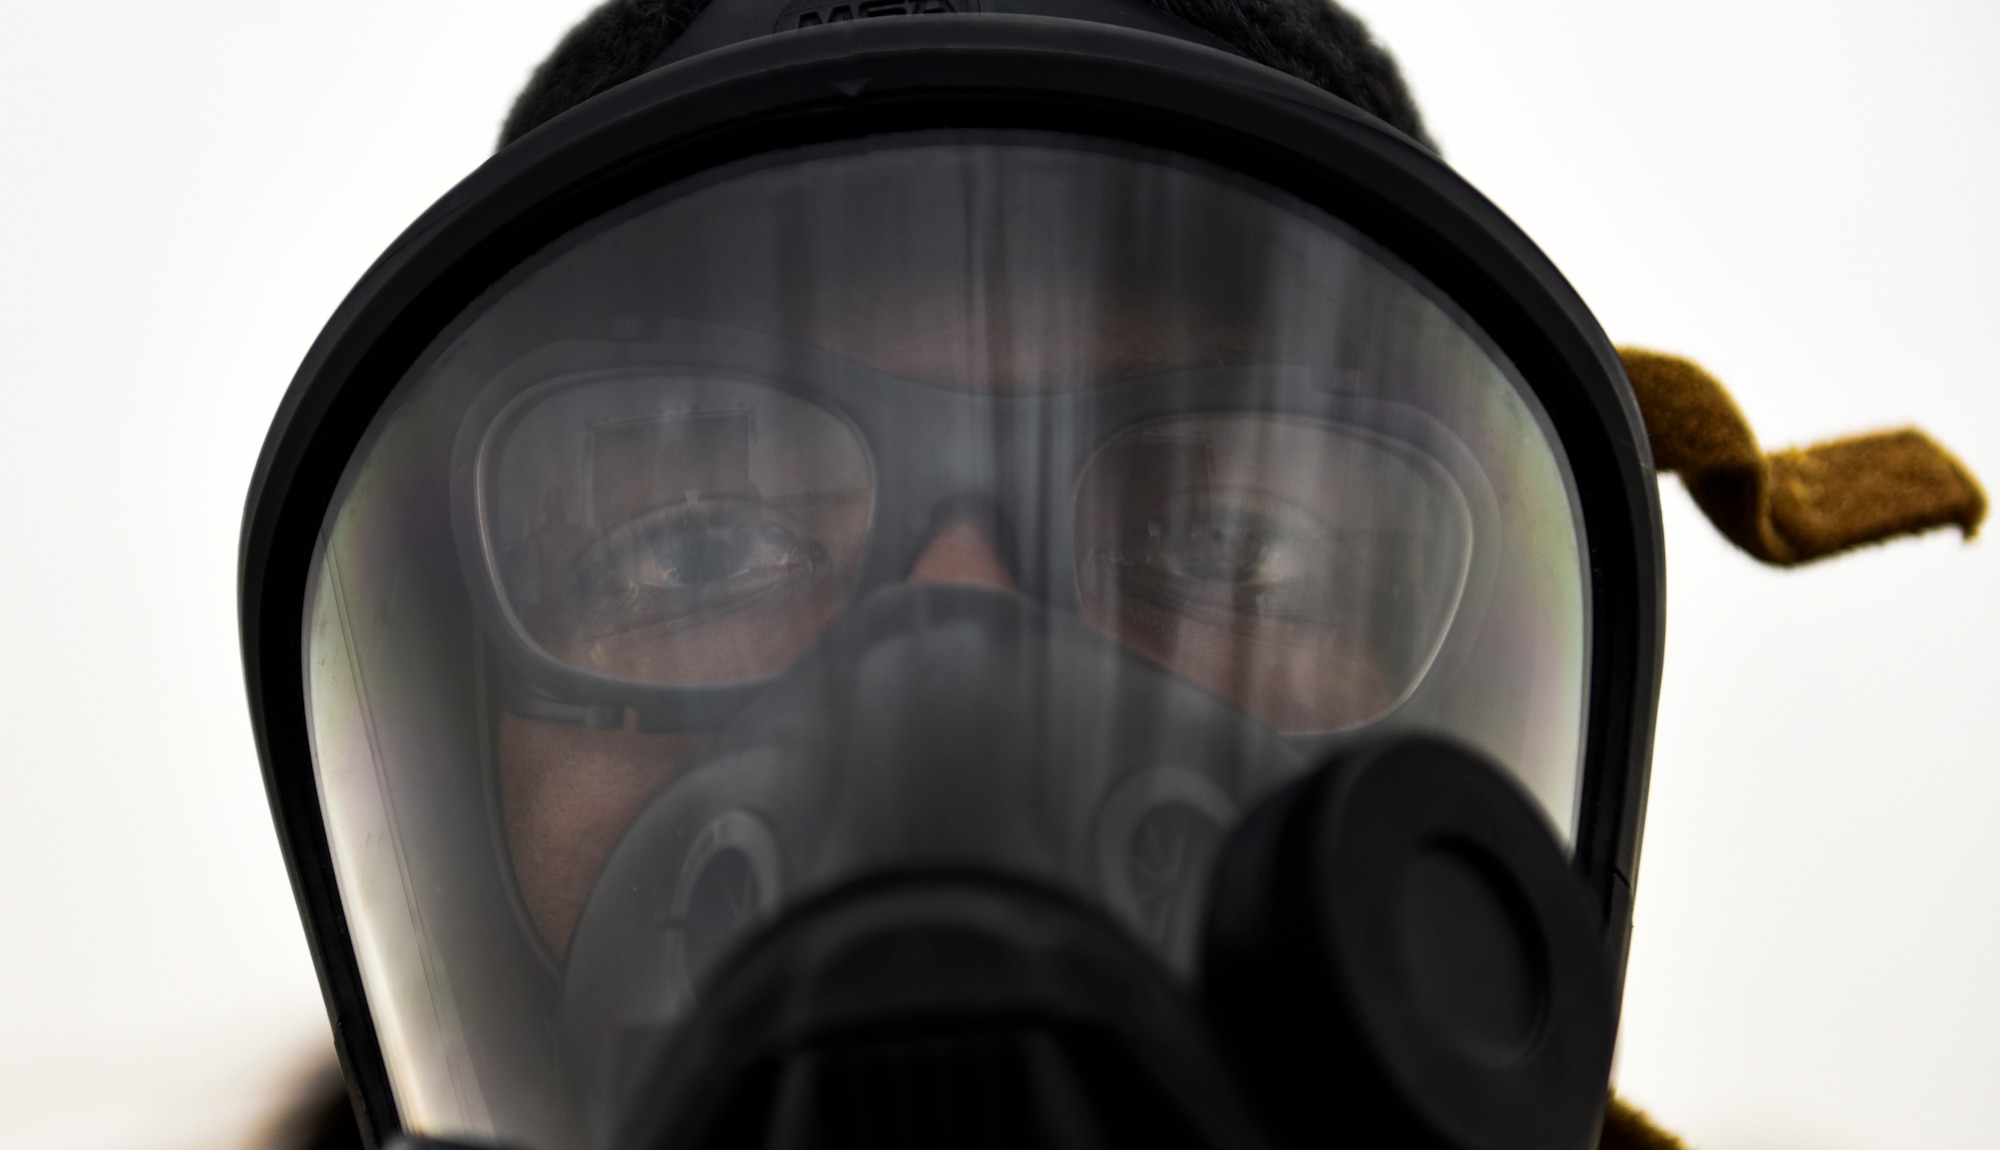 An Airmen dons an oxygen mask while responding during an all-hazard exercise at Ali Al Salem Air Base, Kuwait, May 5, 2020. Responding agencies practiced their skills together to build cohesion and learn each other's capabilities during the all-hazard response exercise. (U.S. Air Force photo by Senior Airman Kevin Tanenbaum)